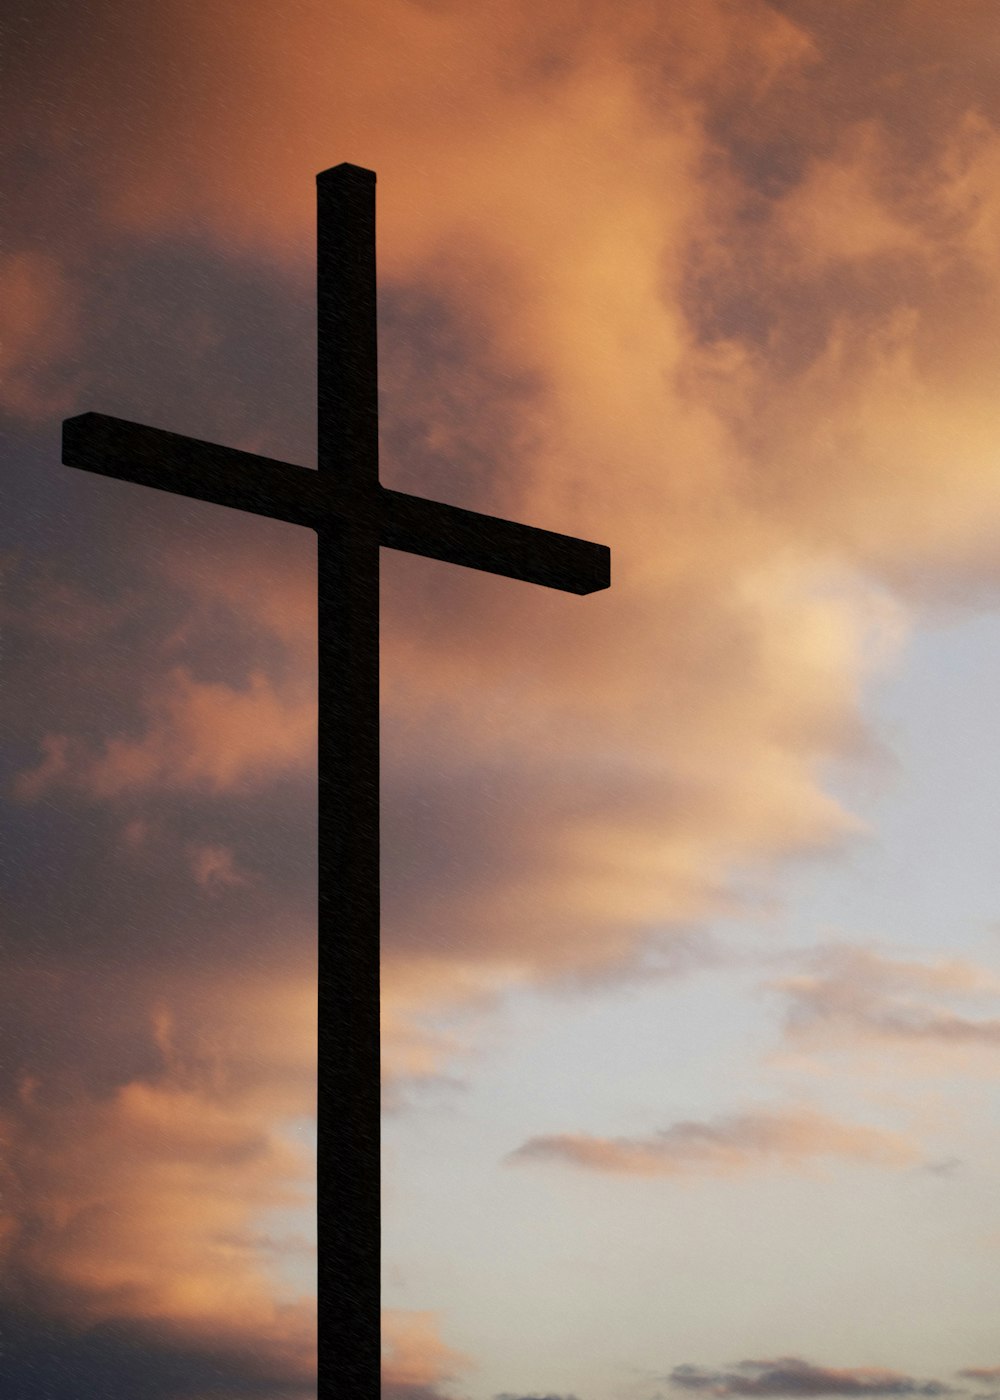 Brown wooden cross during golden hour photo – Free Cross Image on ...